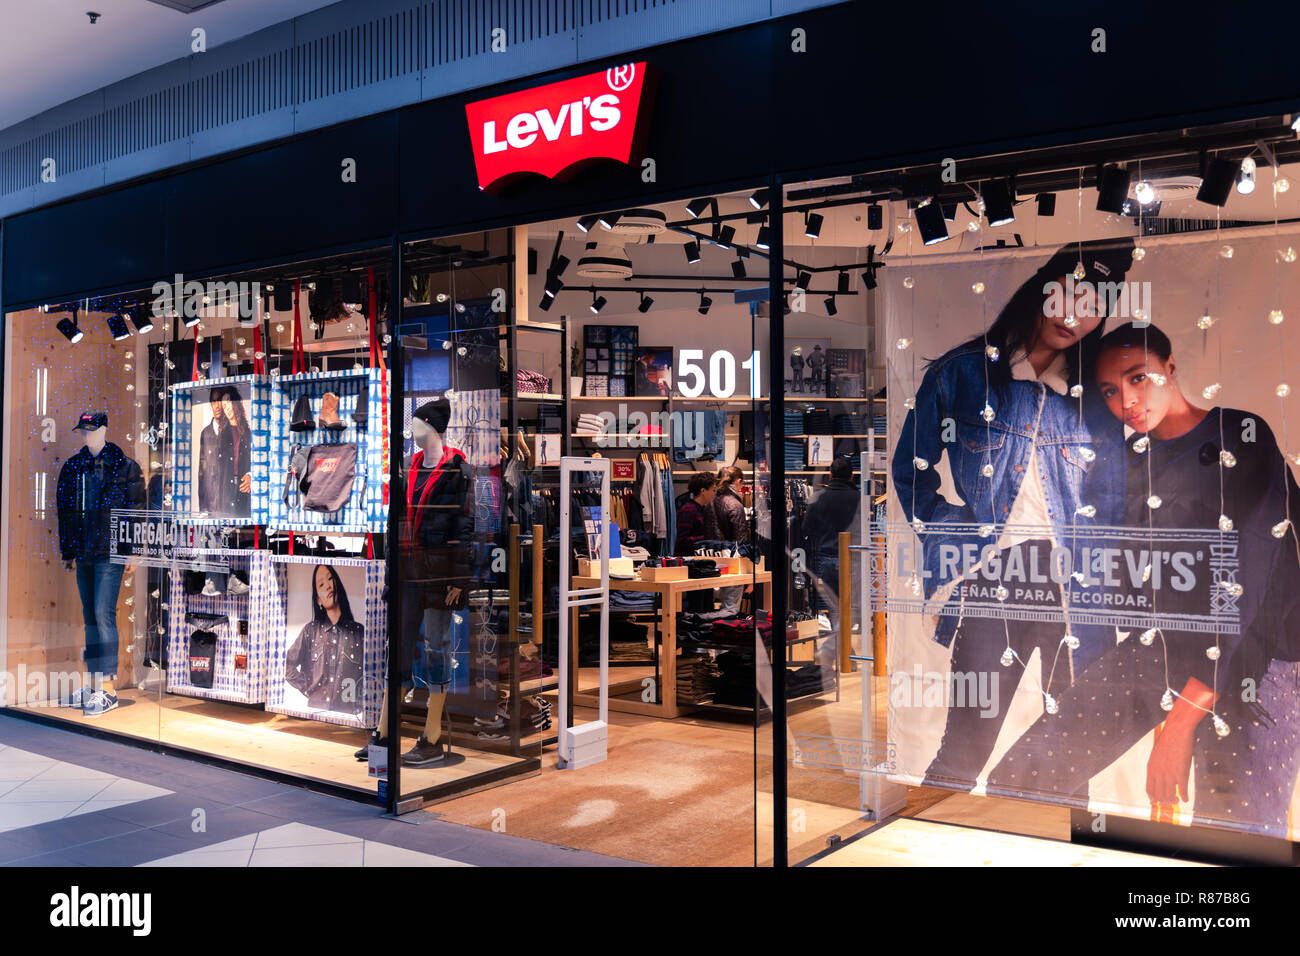 Valencia, Spain- December 13, 2018: Levi's store in the big city shopping  mall Aqua. Christmas decoration. Writing in Spanish Stock Photo - Alamy